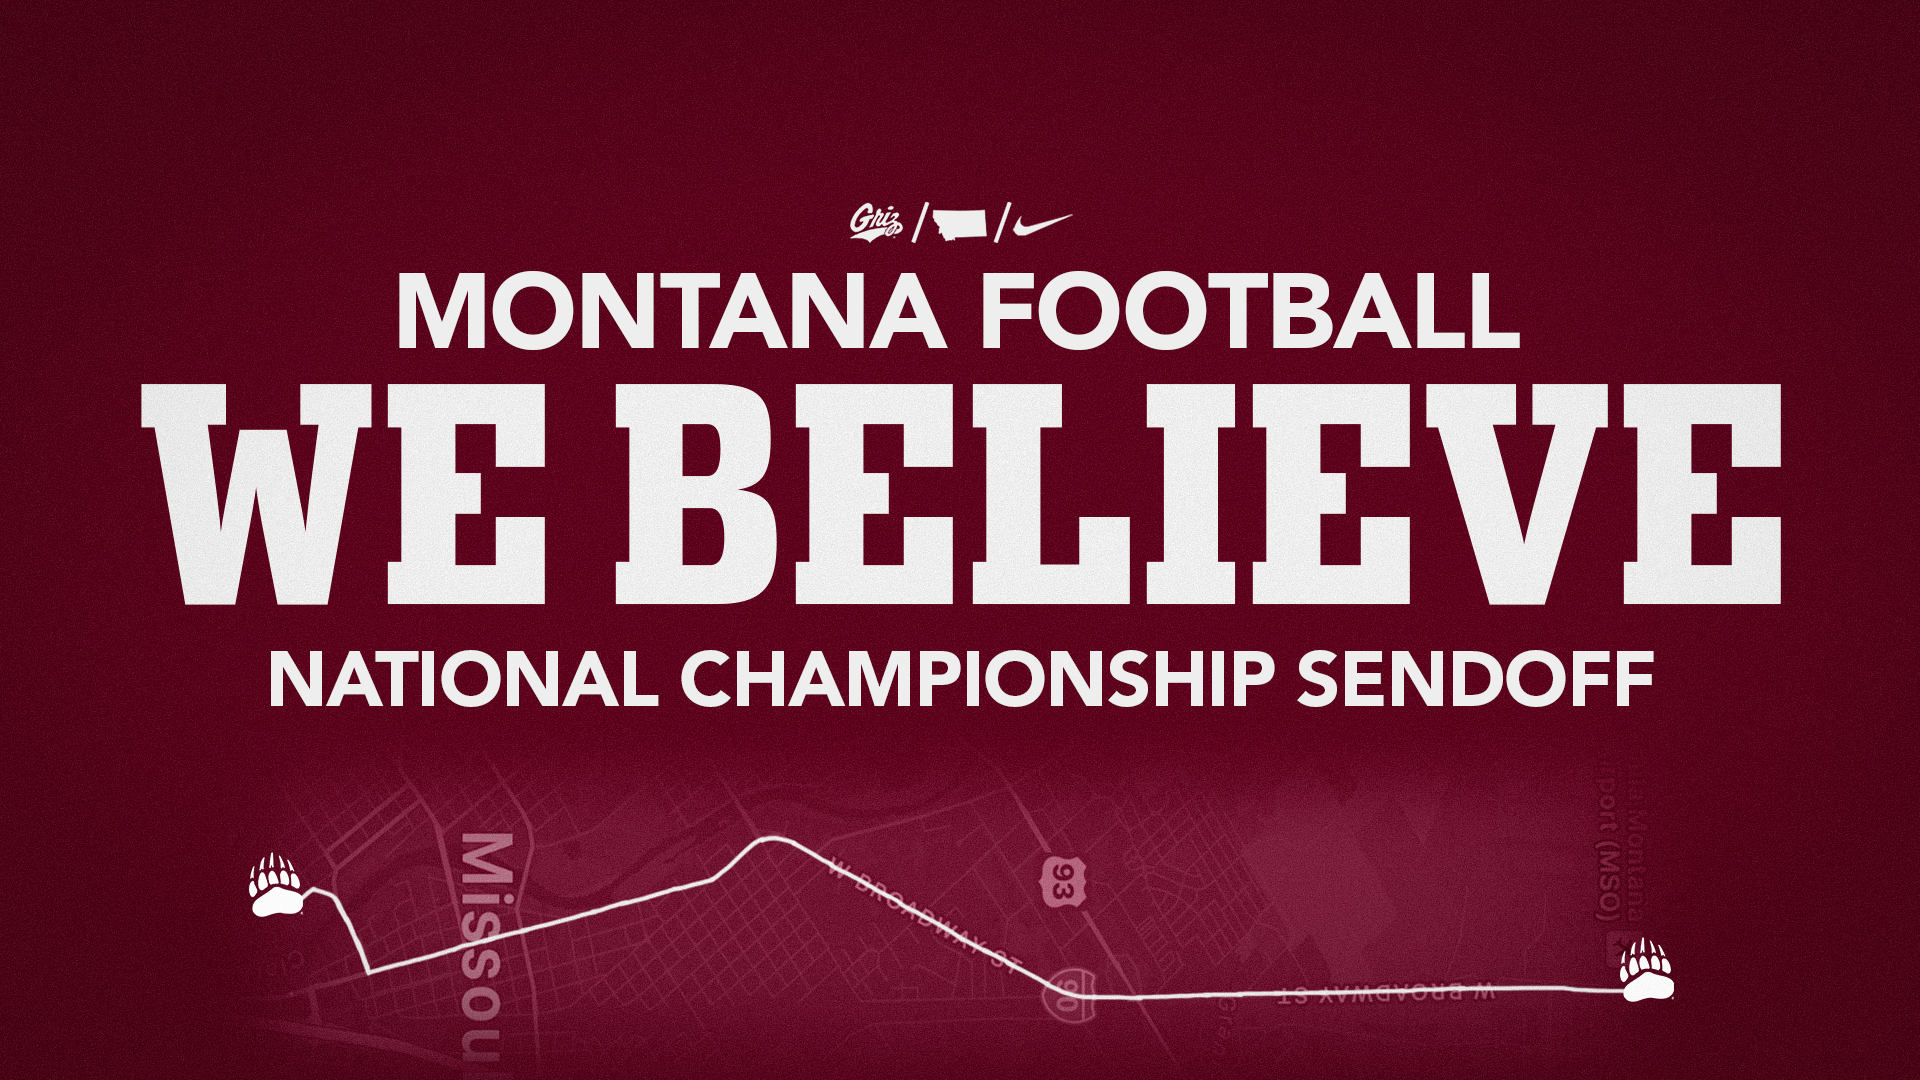 Maroon back with white text that says WE BELIEVE.